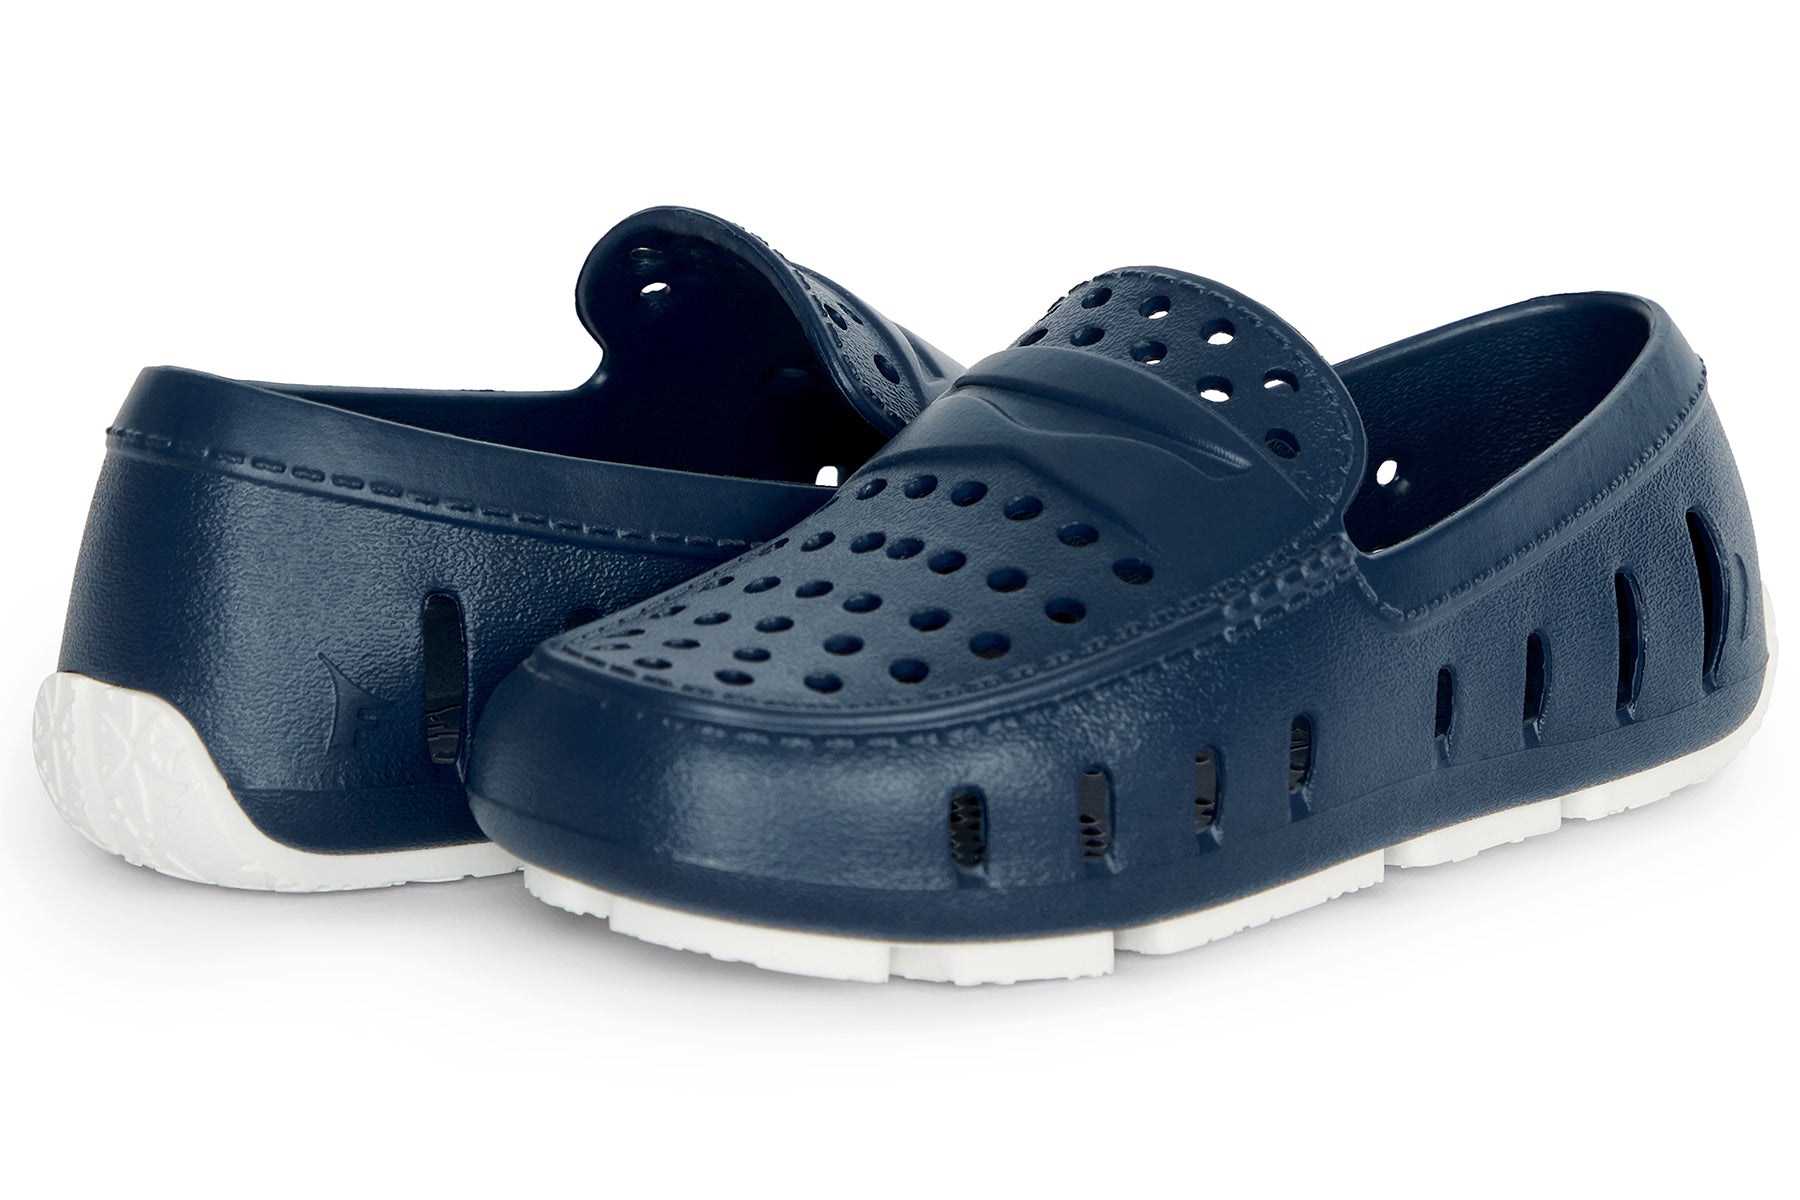 Prodigy Driver Loafers